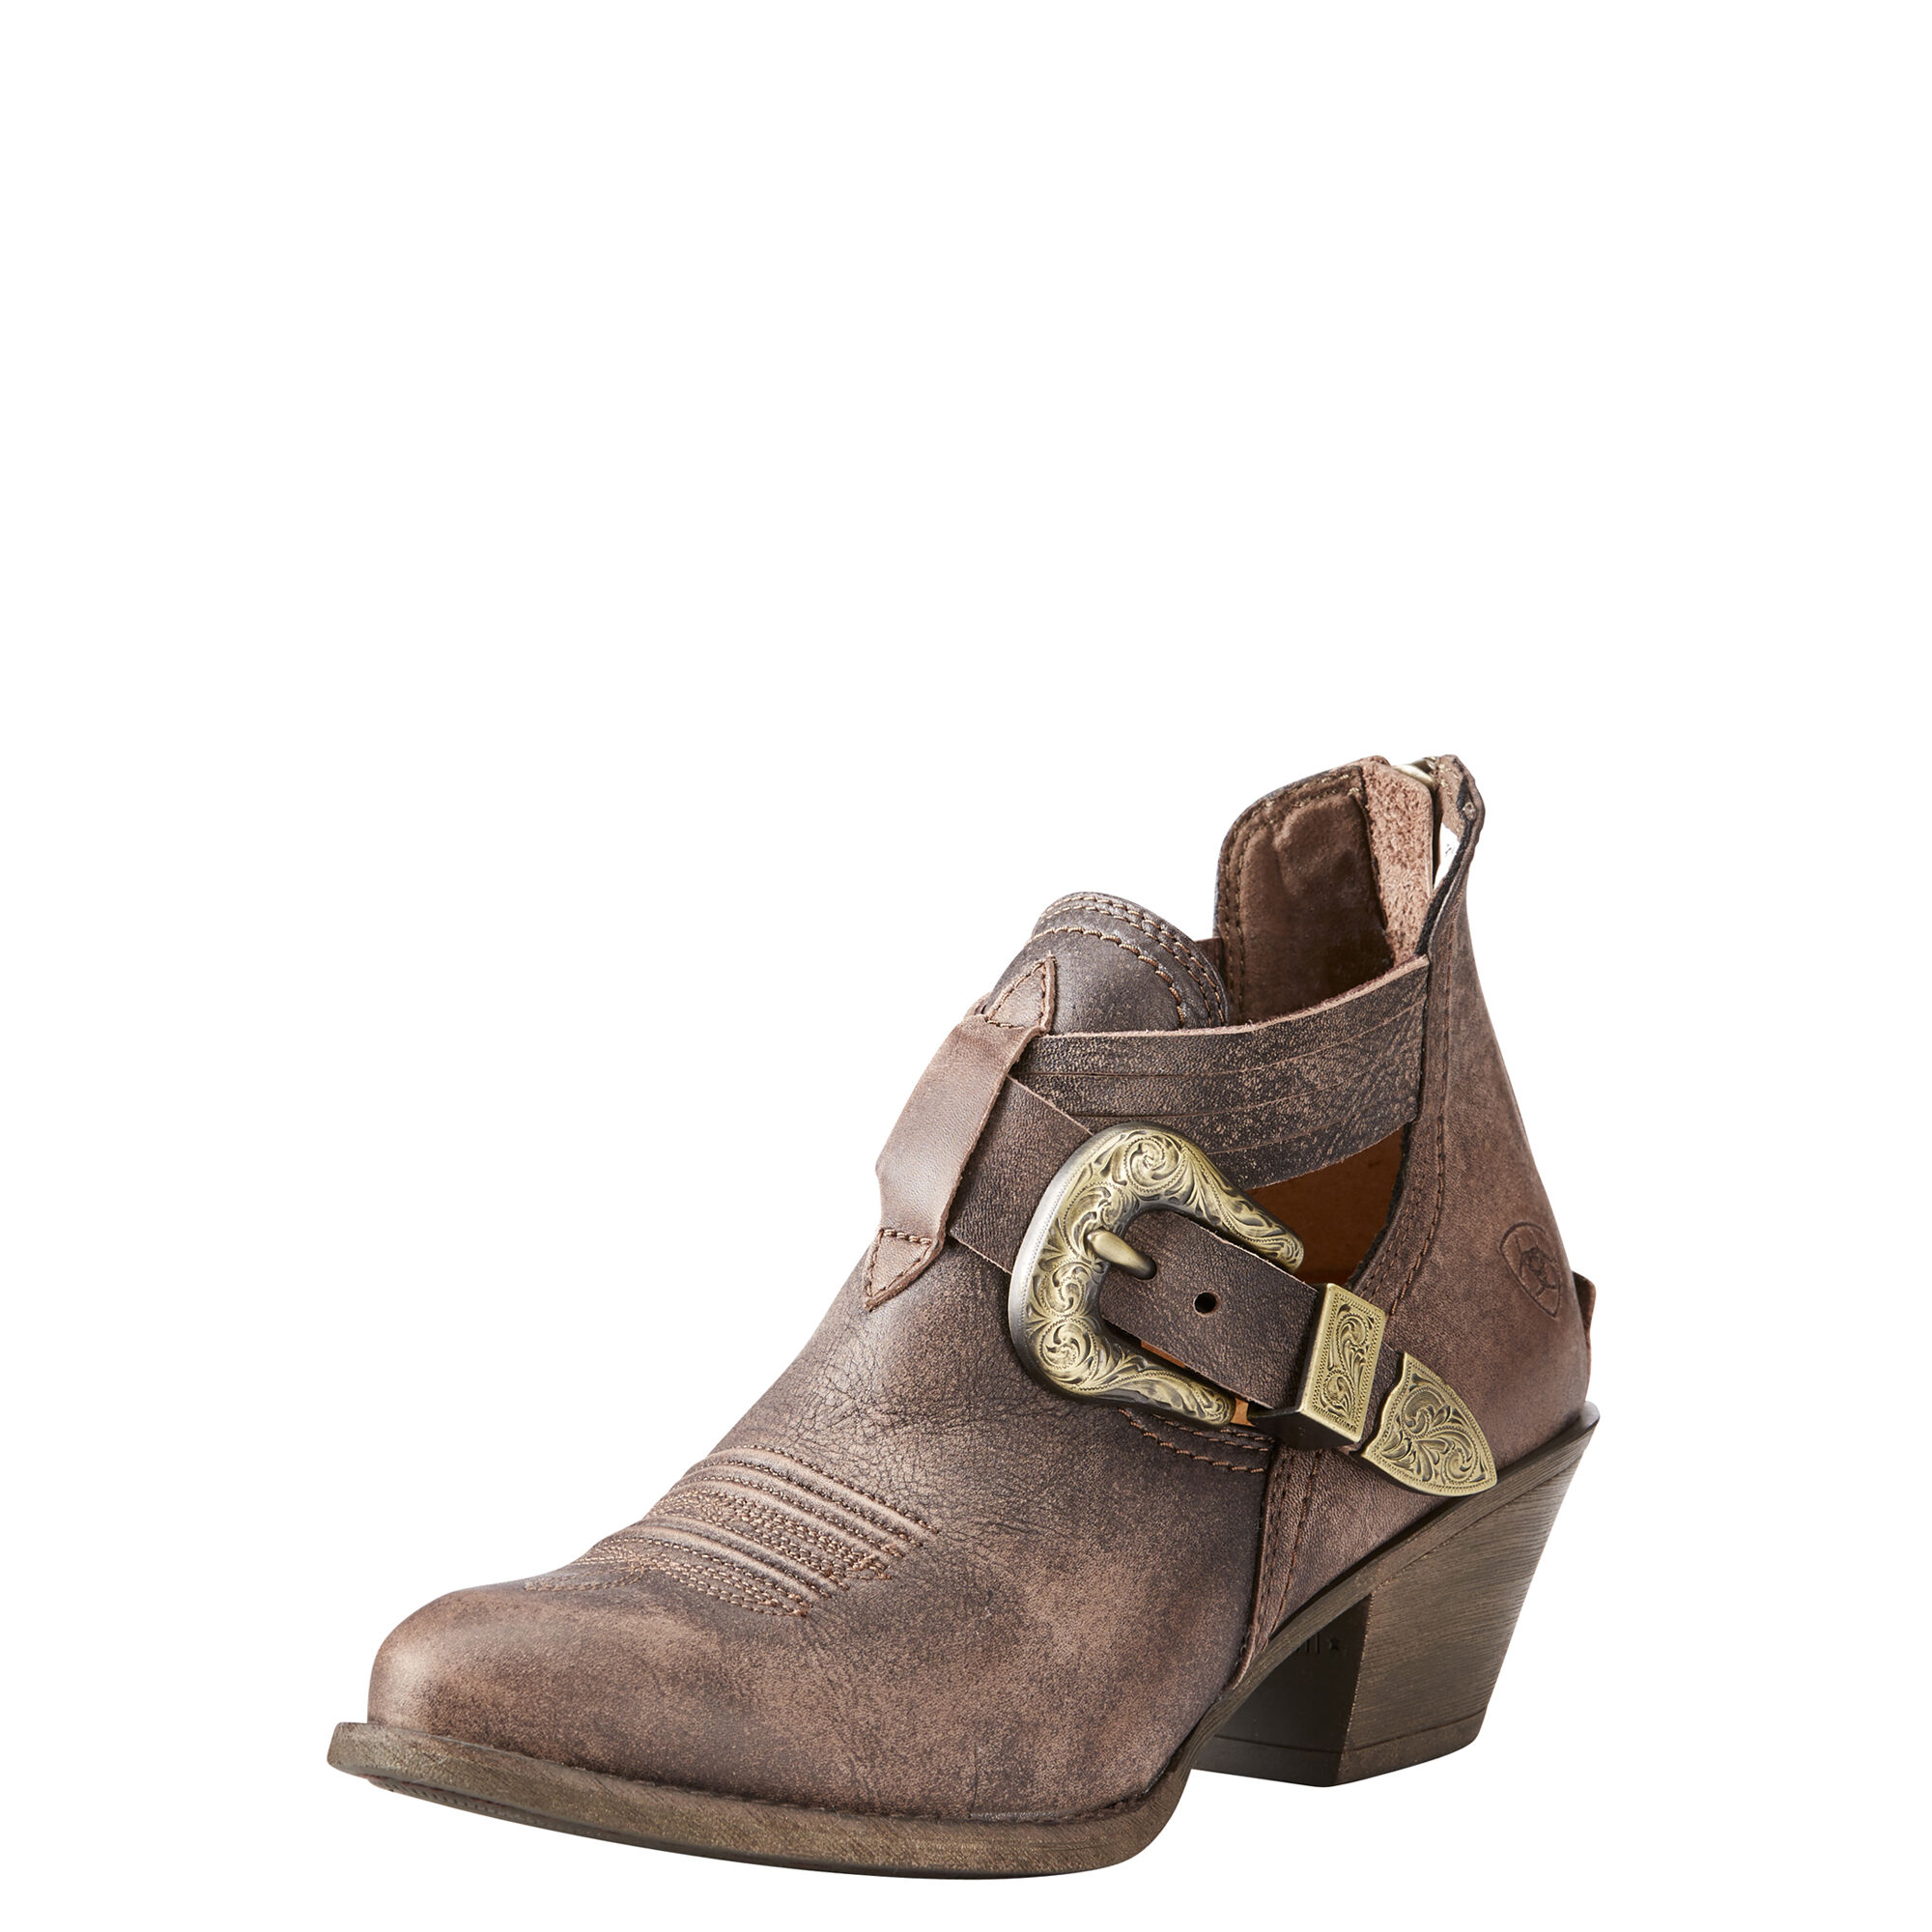 ariat women's dulce tawny ankle boots